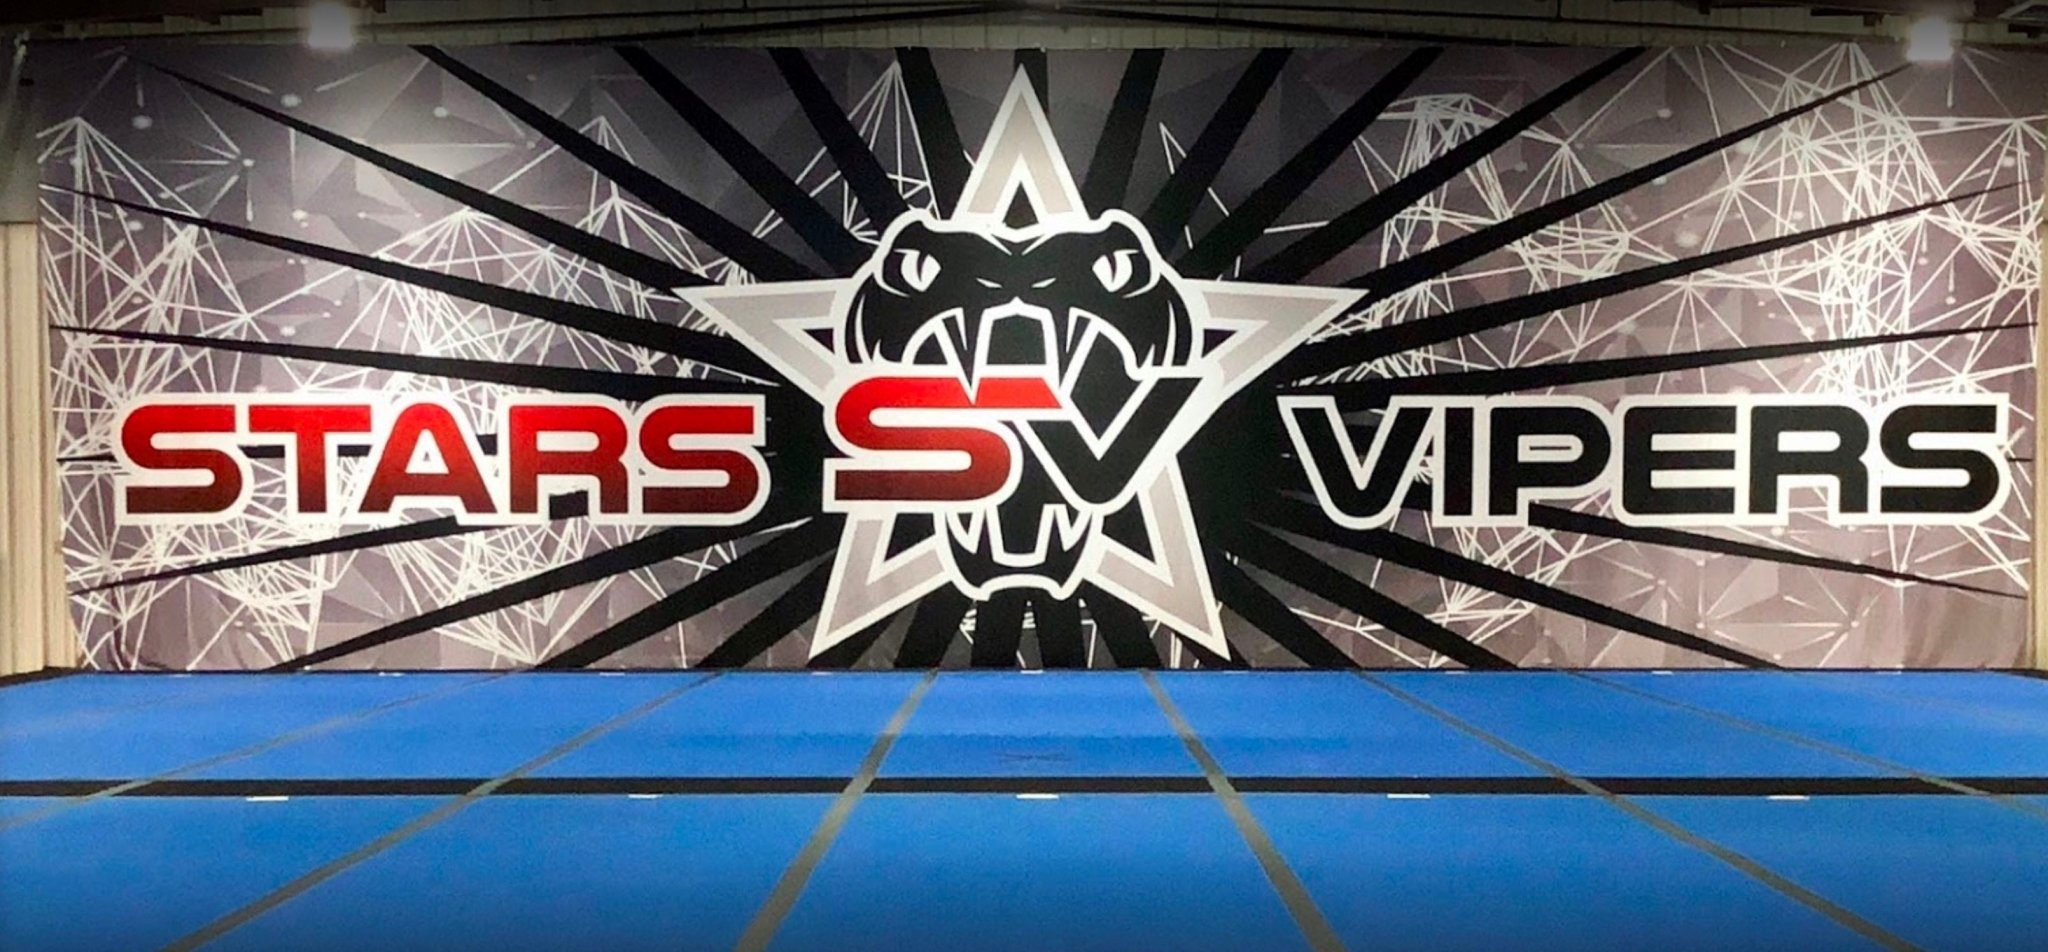 STARS VIPERS - Nfinity